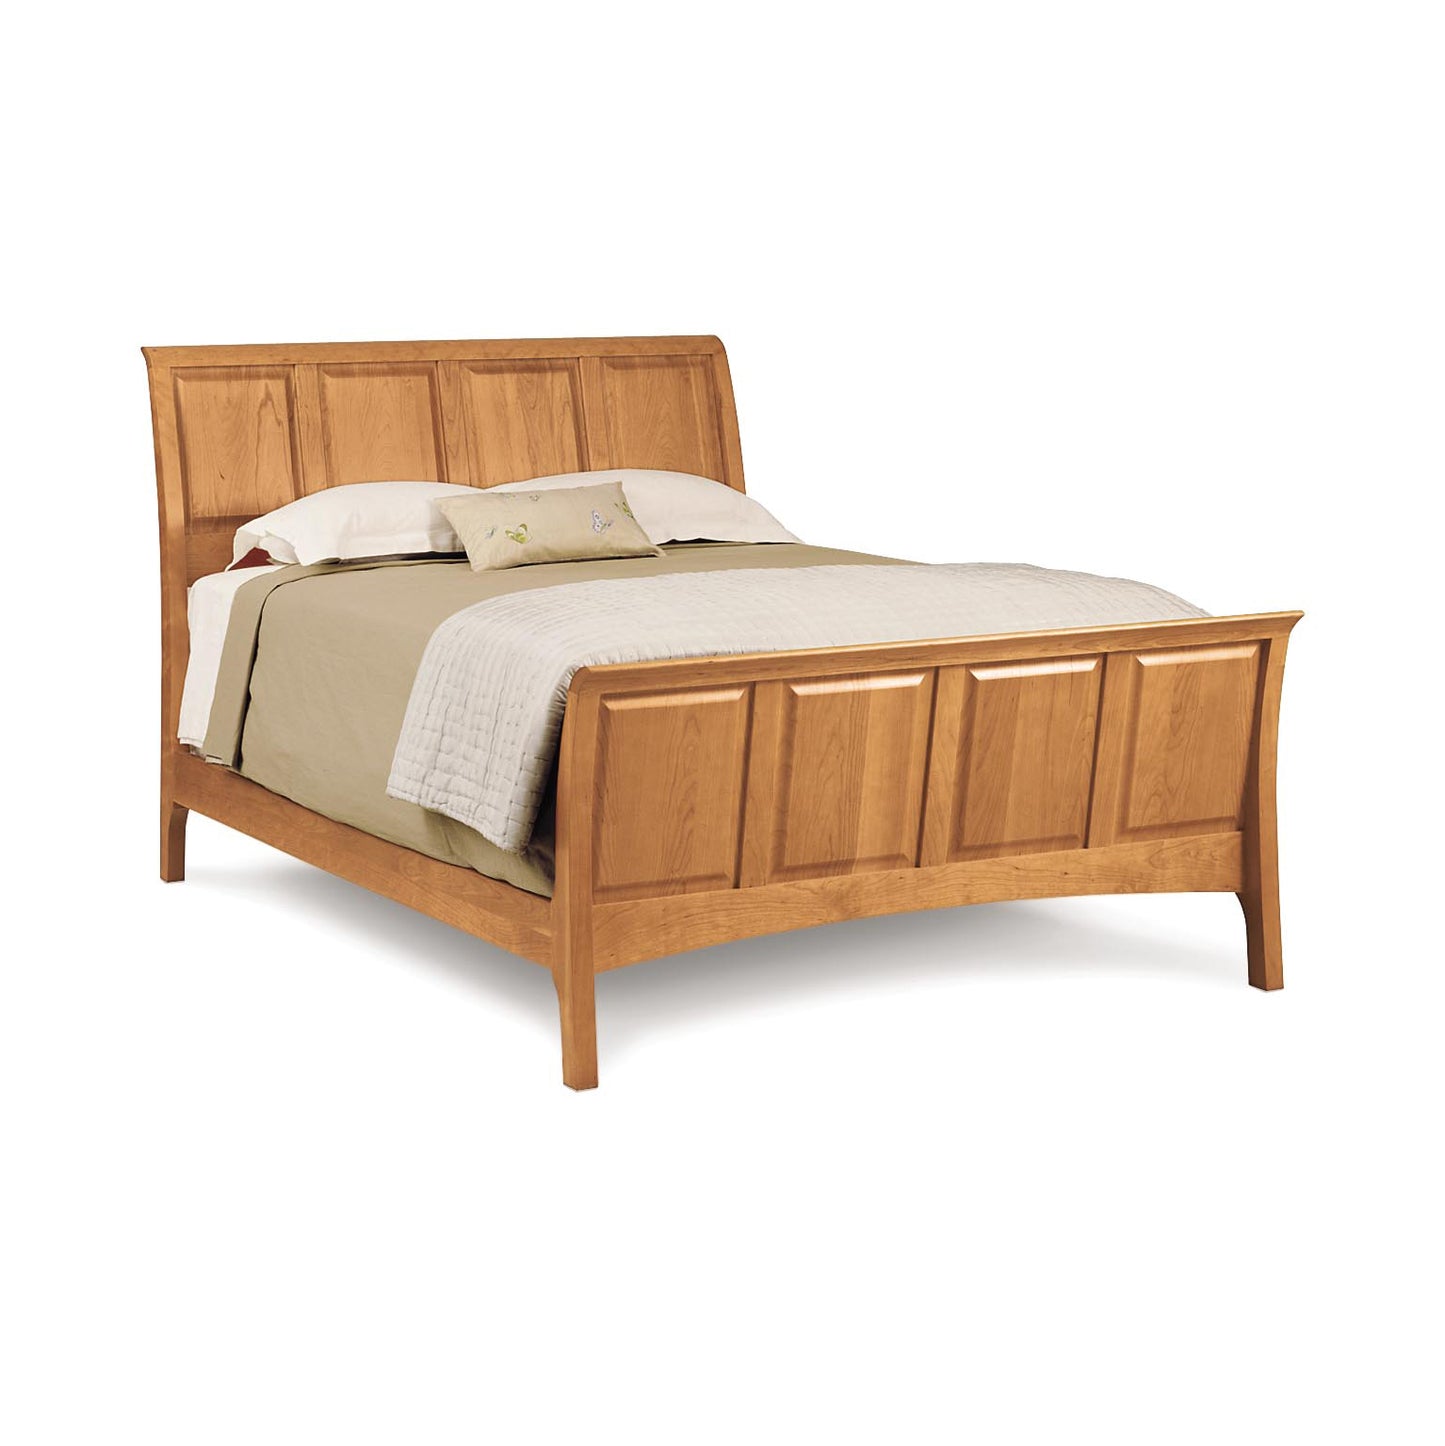 A solid cherry wood queen-sized Sarah High Footboard Sleigh Bed with a neutral-toned bedding set in a white background by Copeland Furniture.